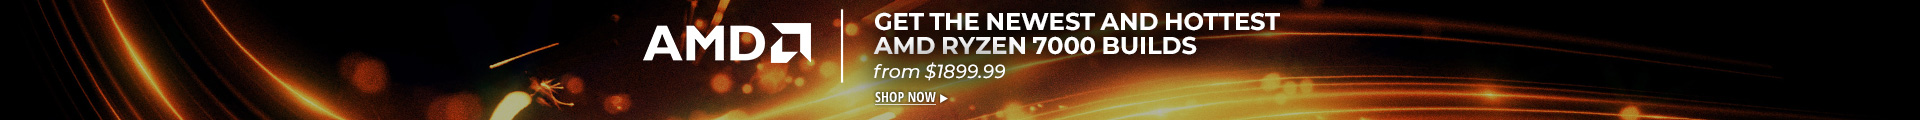 Get the newest and hottest AMD Ryzen 7000 builds